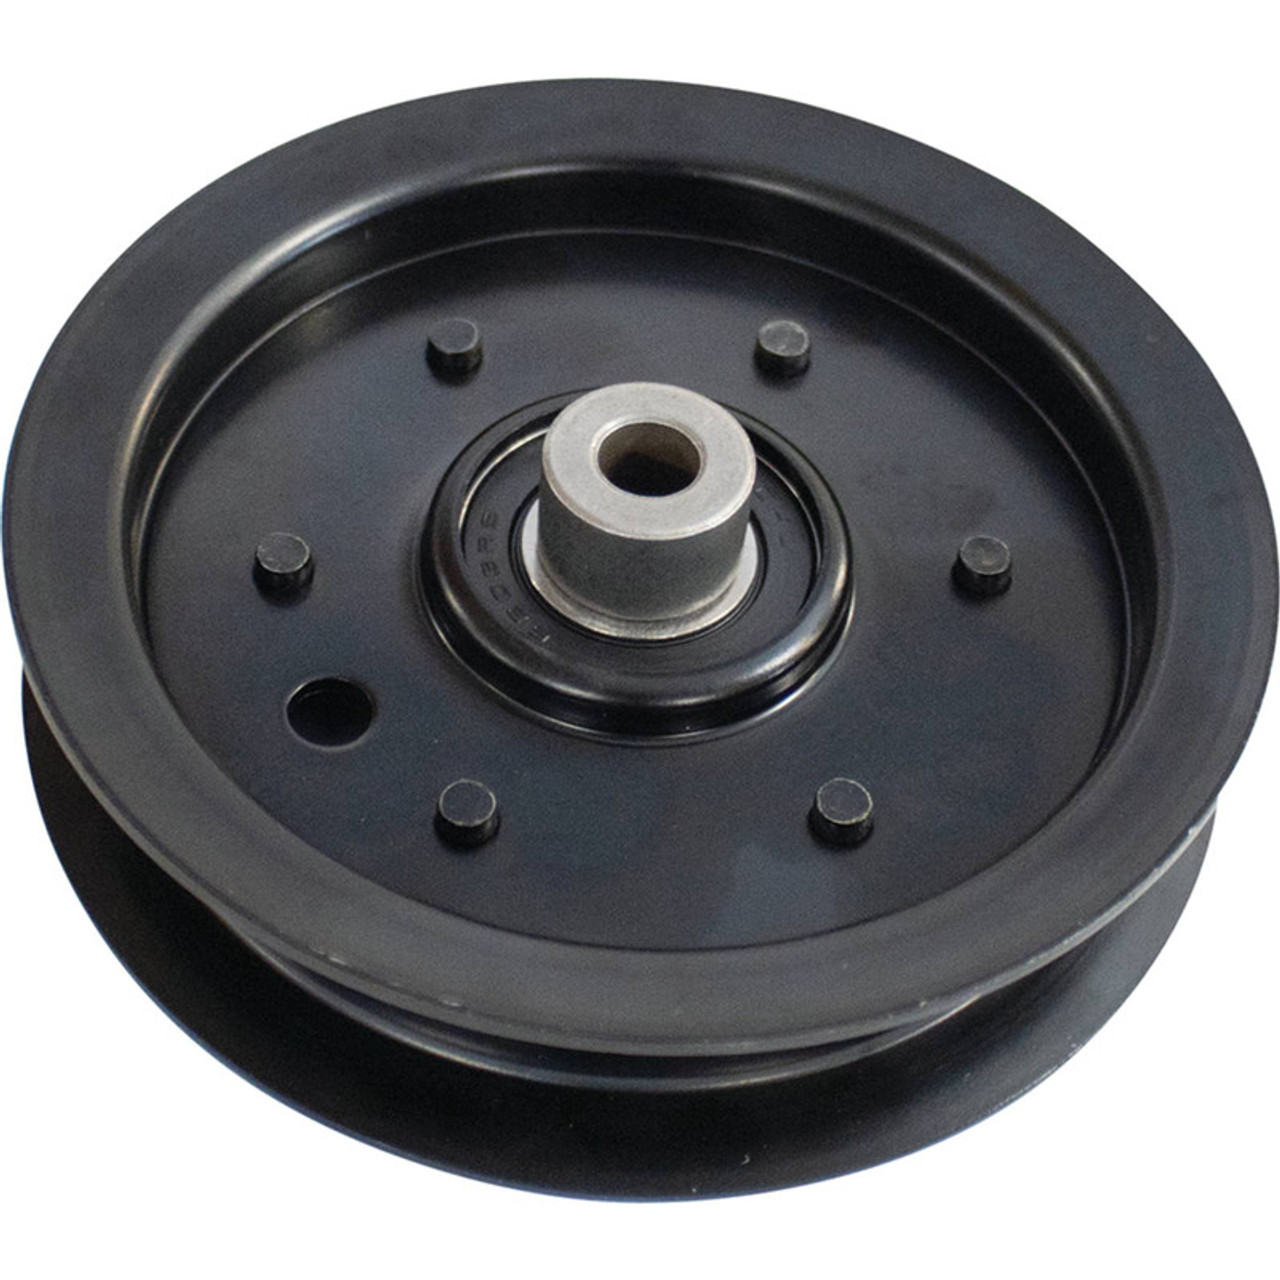 Flat Idler Pulley for Gravely 07350100 7350100 ZTX ZTXL OD: 4-7/8" ID: 3/8" Height: 1-1/8"